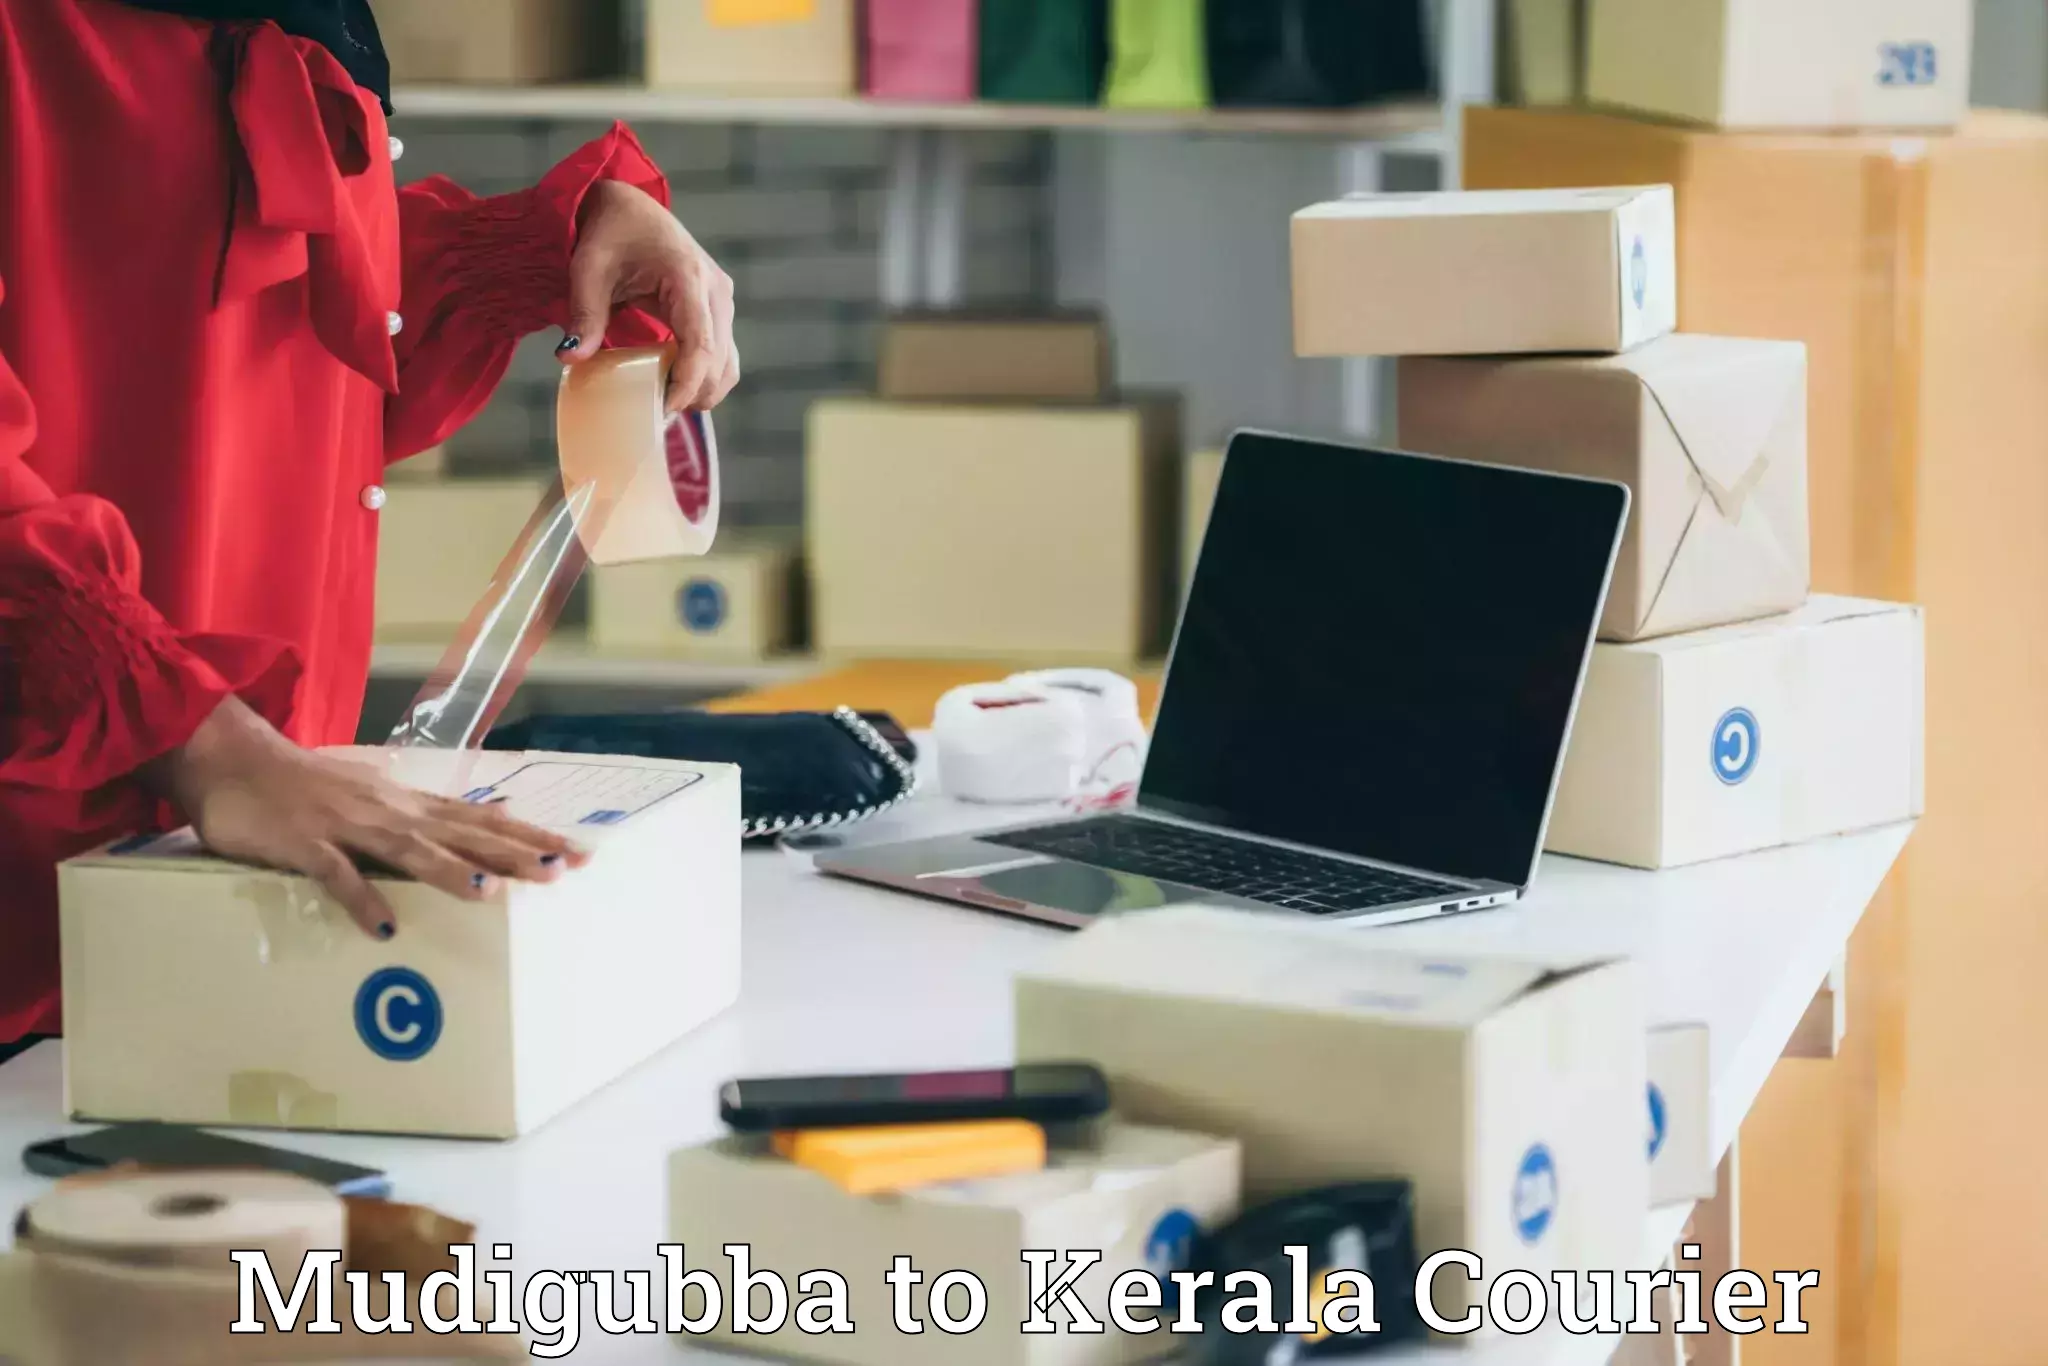 State-of-the-art courier technology Mudigubba to Manthuka